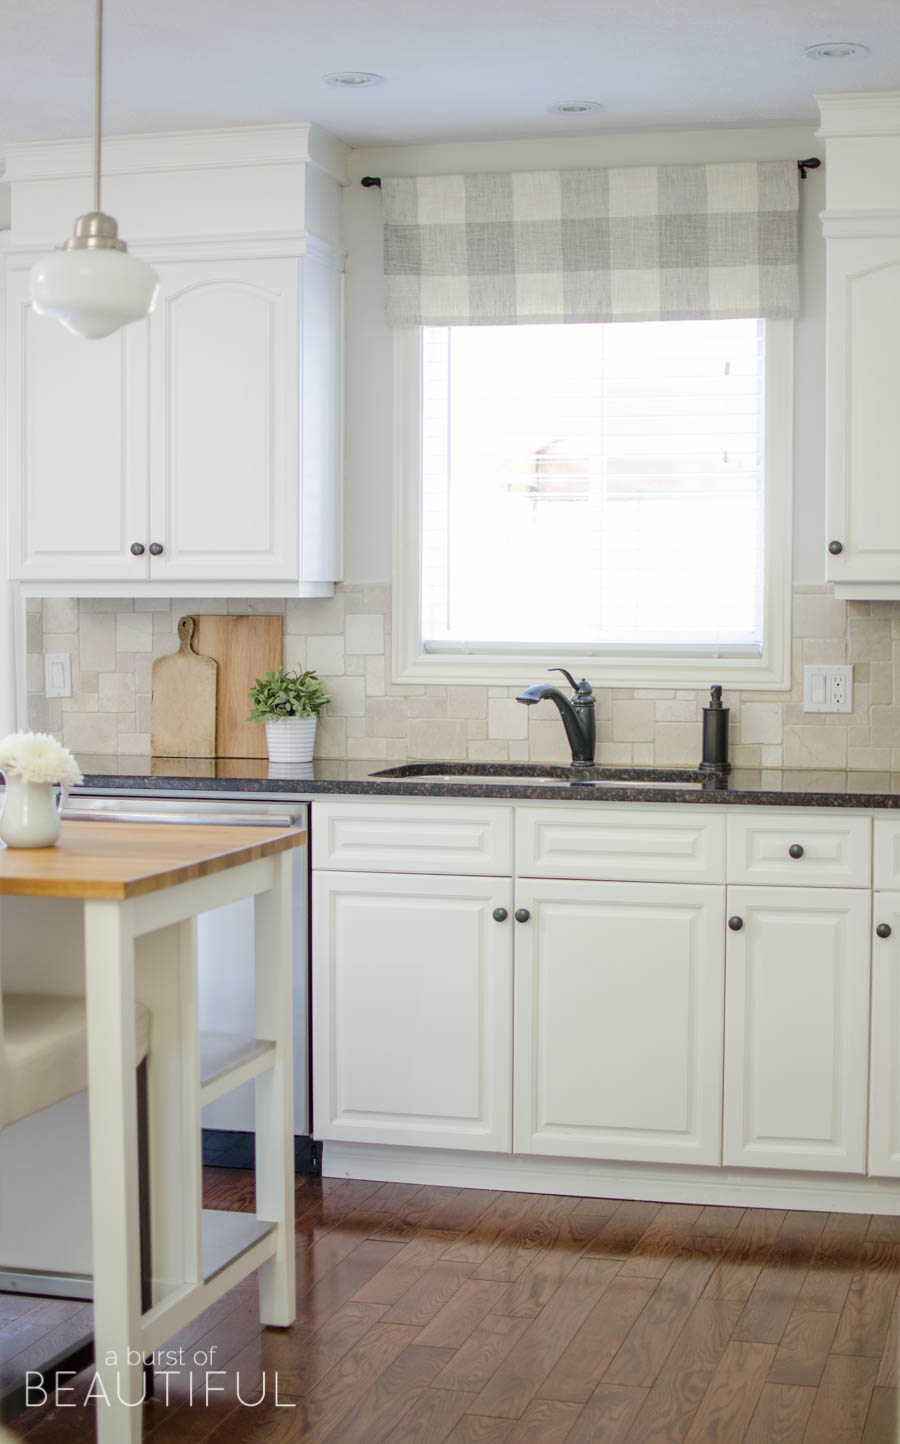 A window valance made from neutral buffalo check fabric compliments this  simple farmhouse kitchen perfectly.